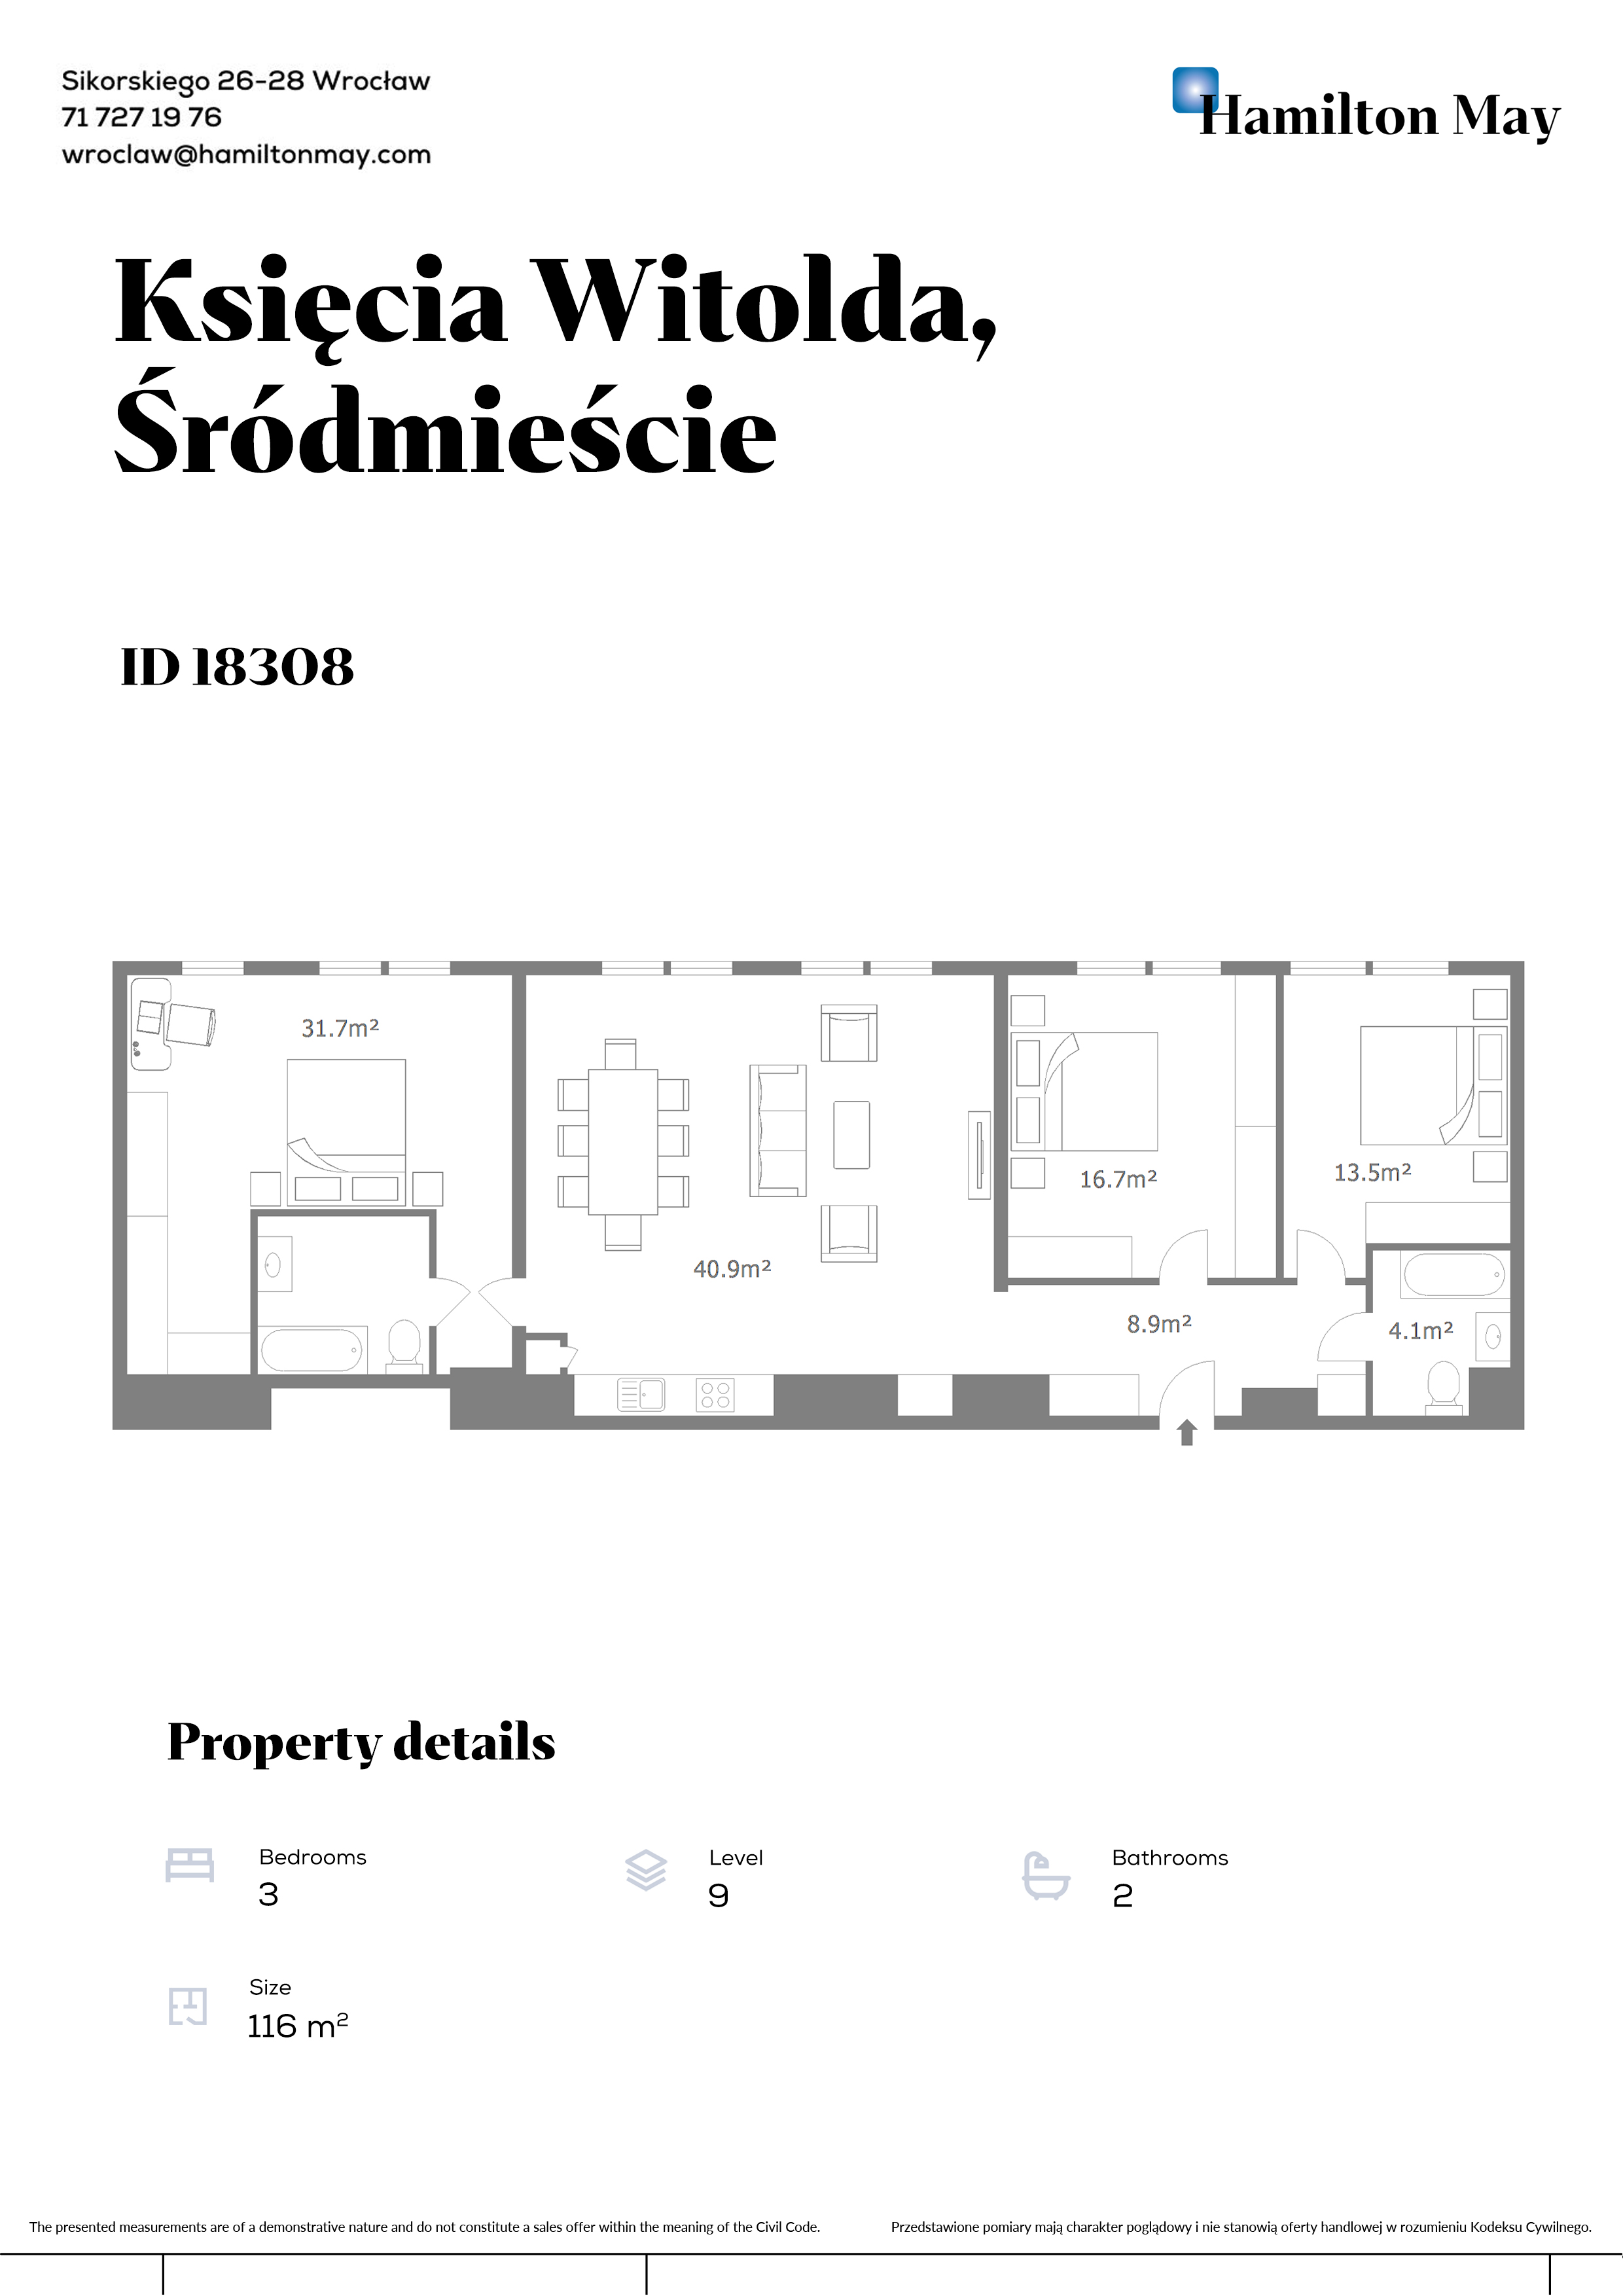 Apartment at Księcia Witolda with Odra river view - plan